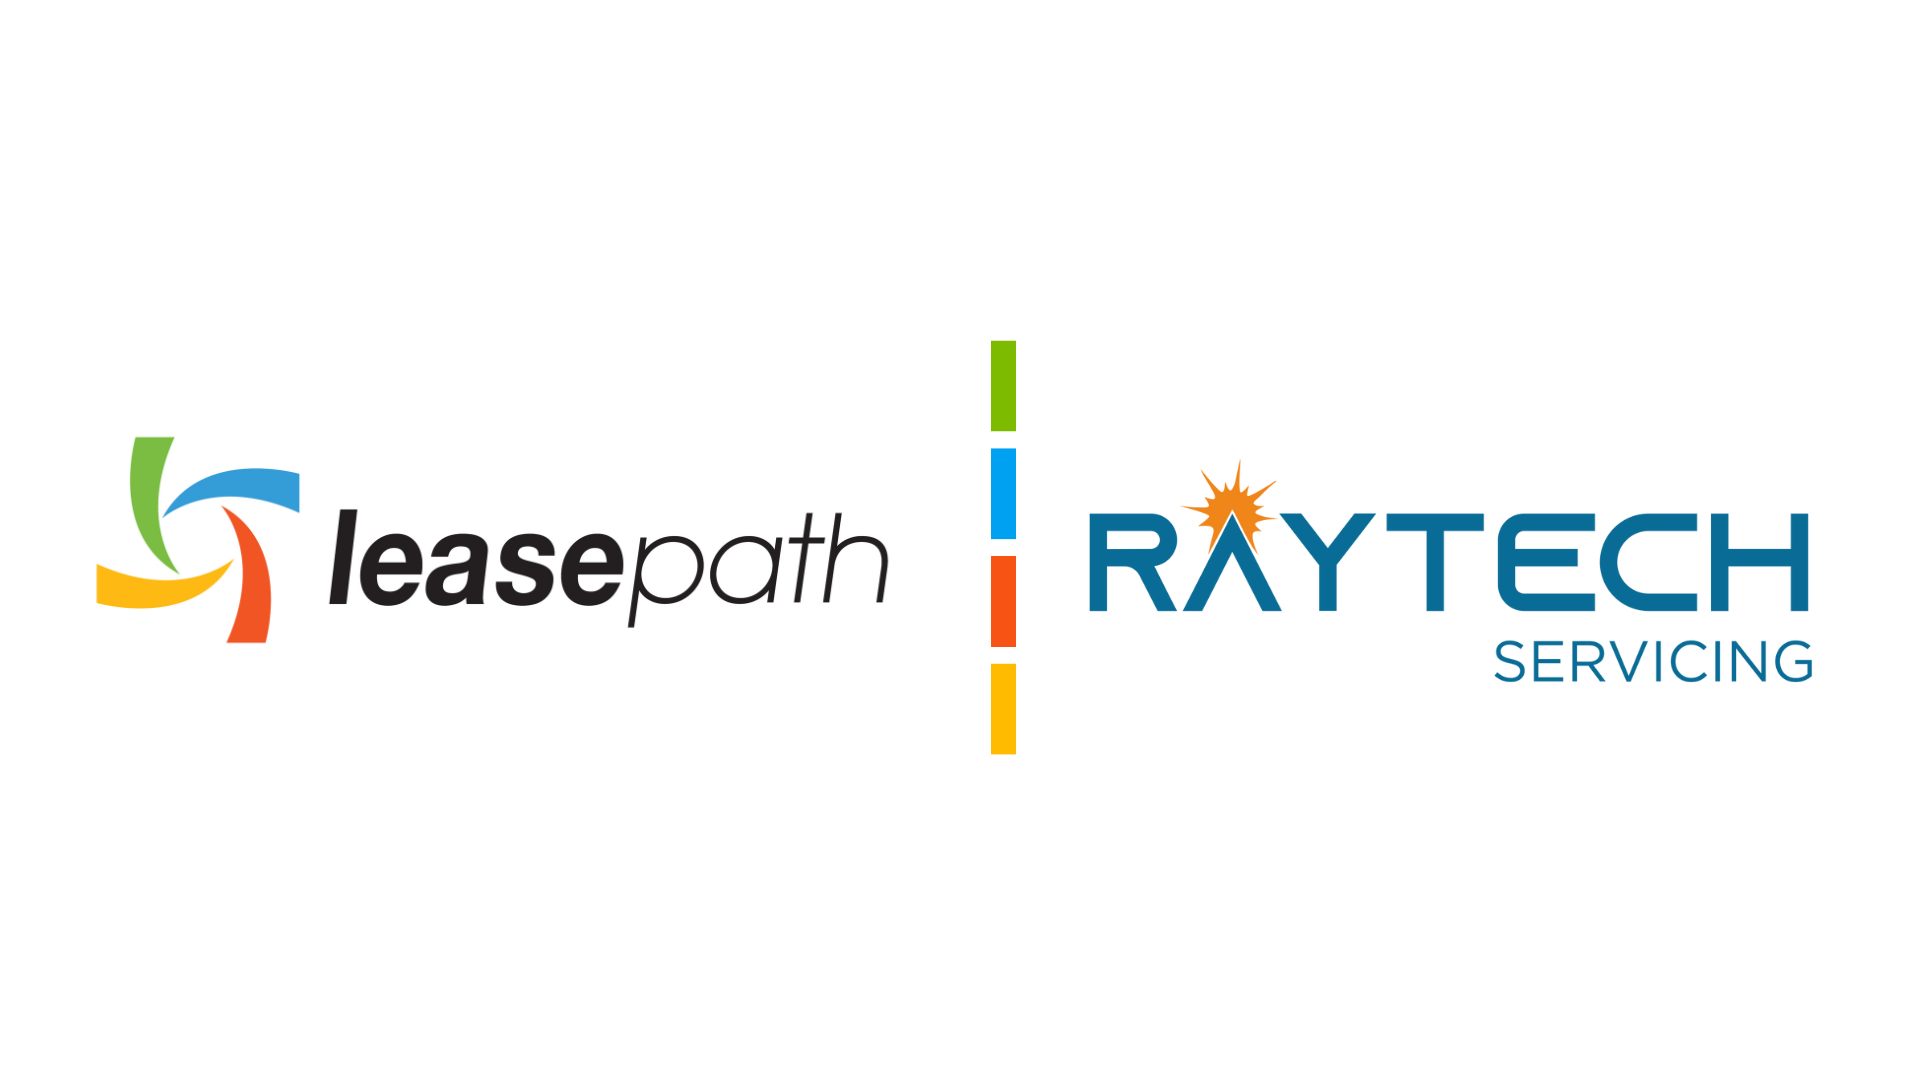 Featured image for “RayTech Servicing Leads Path Forward with Leasepath Enterprise”